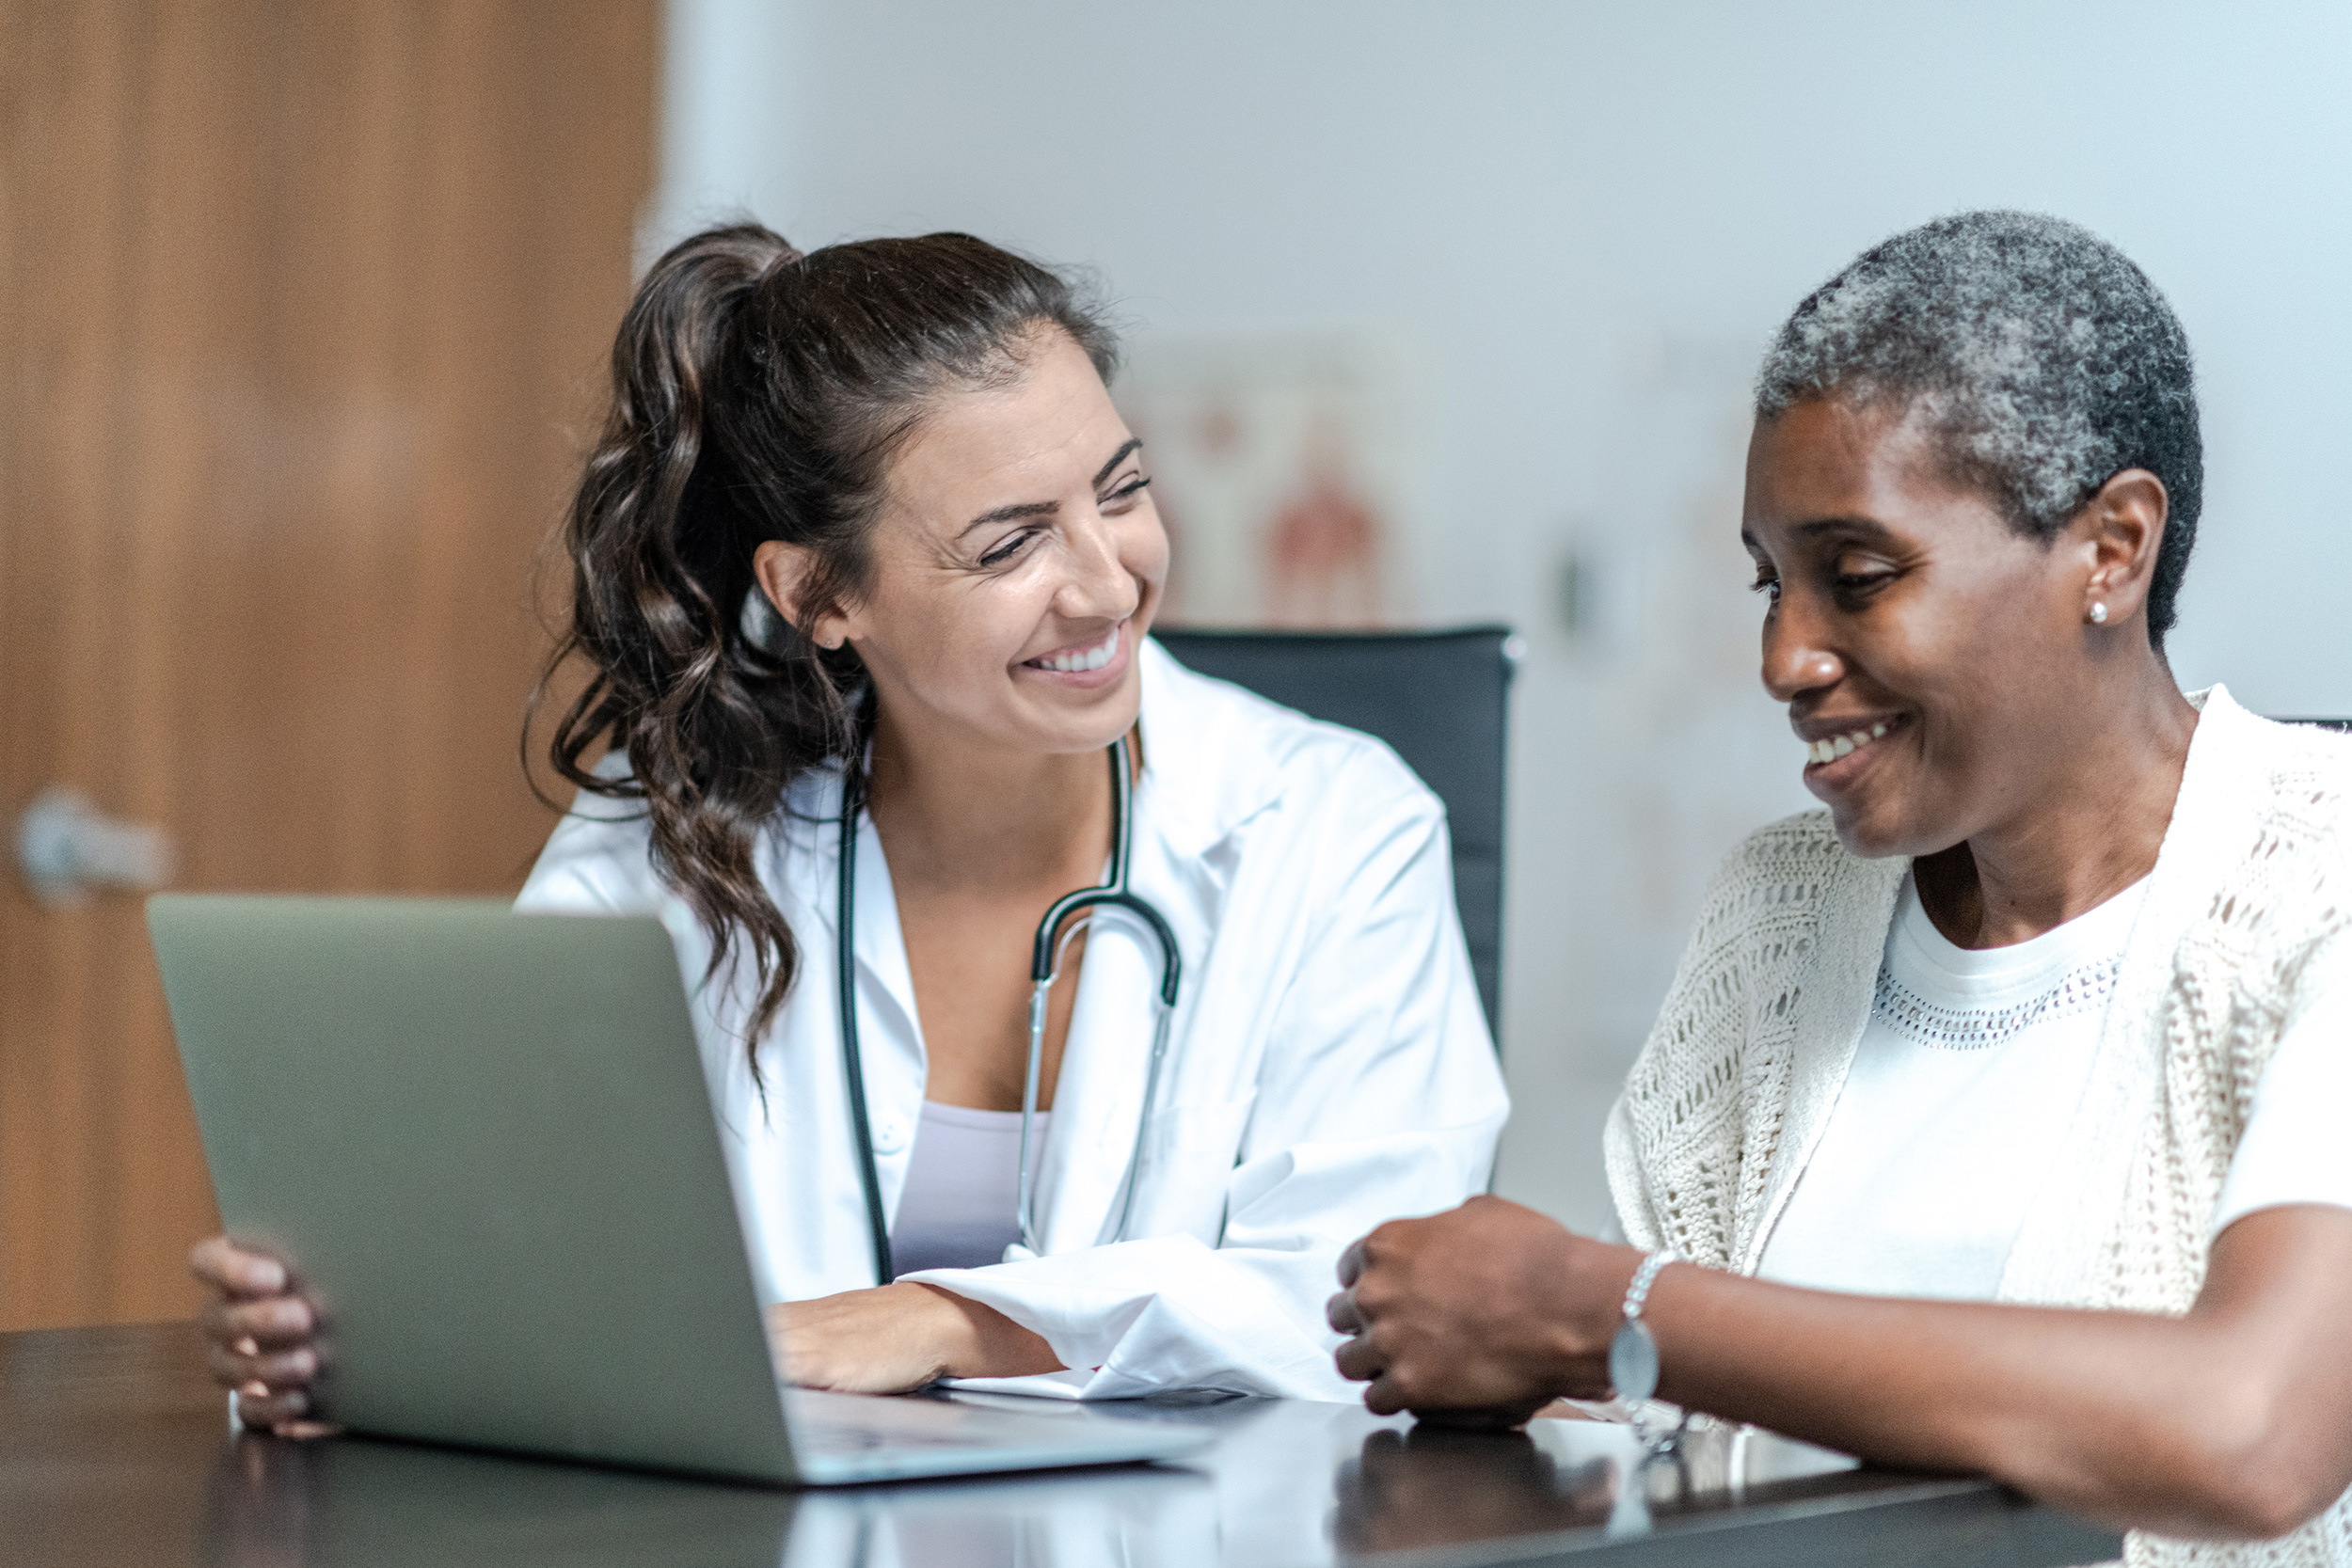 A doctor sits at a table with a laptop, talking to her patient. When you're awarded Social Security Disability due to health problems, you receive back pay to cover time you spent waiting on a decision.